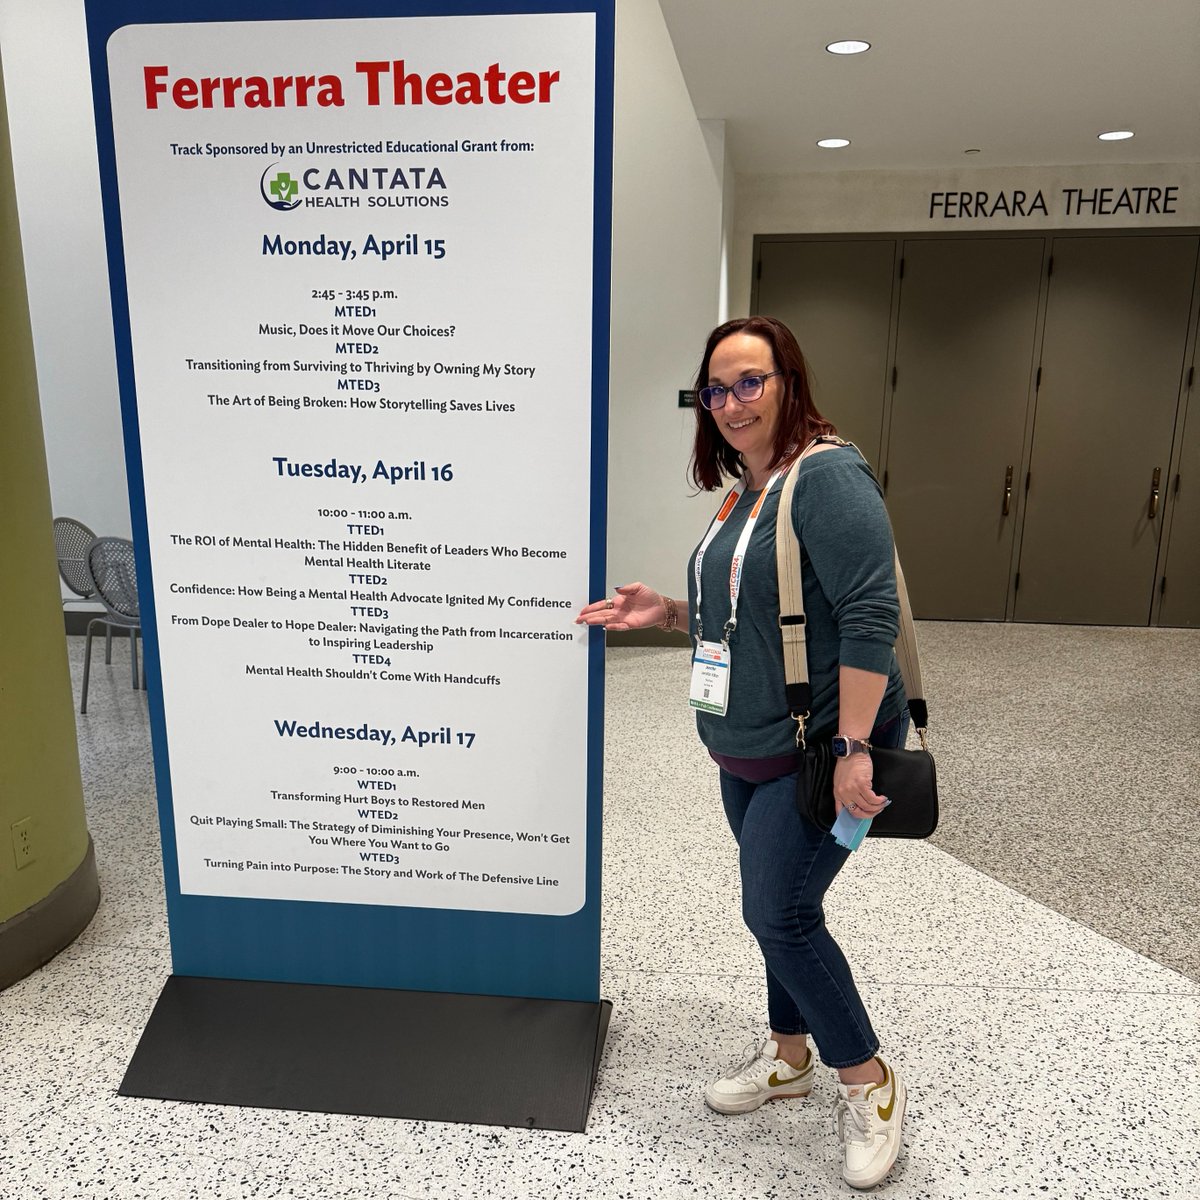 WestCare's Director of Training and Technology, Jennifer Hilton, is checking out the theater at @NationalCouncil in preparation for #NatCon24! We can't wait to hear her talk, 'Confidence: How Being a Mental Health Advocate Ignited My Confidence'. See you there, Jen!